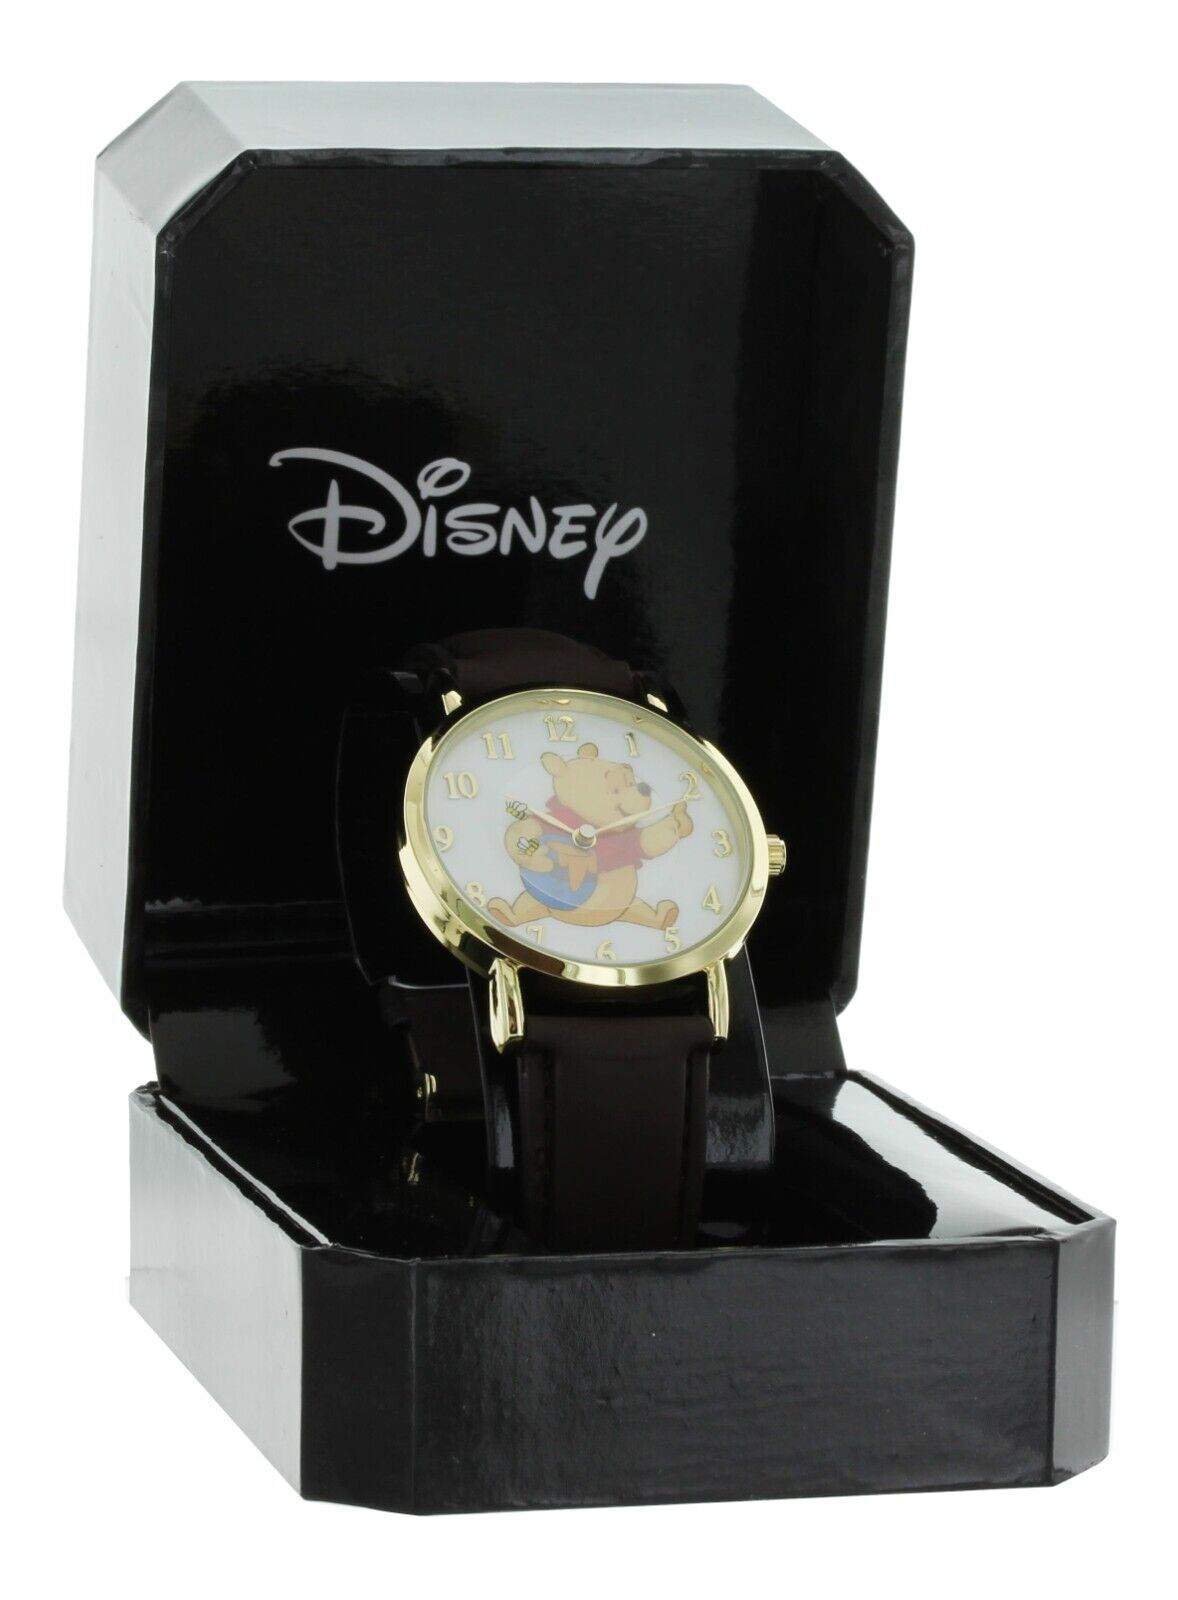 DISNEY WINNIE THE POOH GOLD TONE EASY TO READ WATCH WITH ROTATING BEES